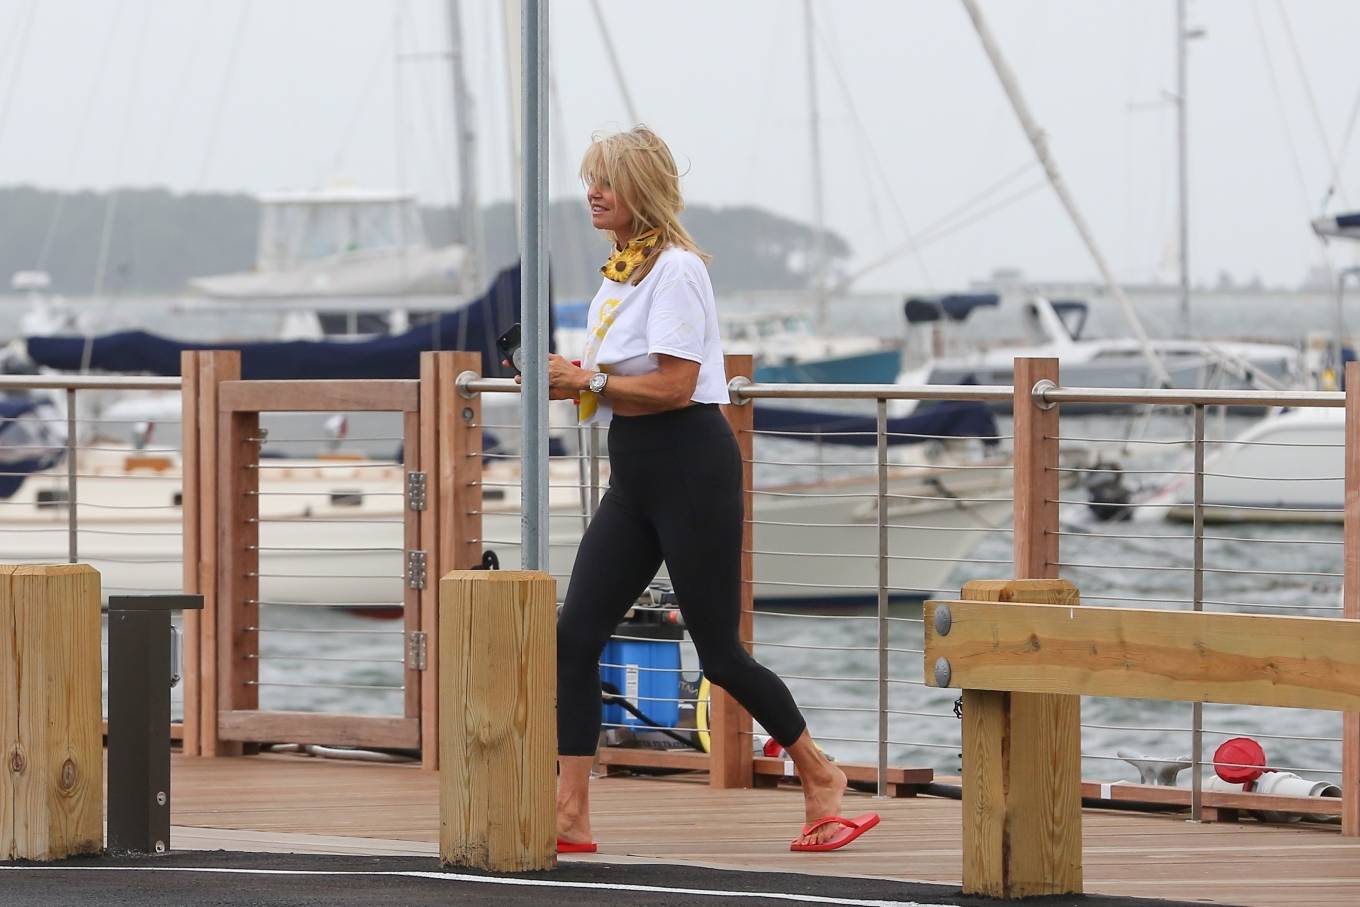 Christie Brinkley – Capturing with phone Tropical Storm Isaias approaching The Hamptons